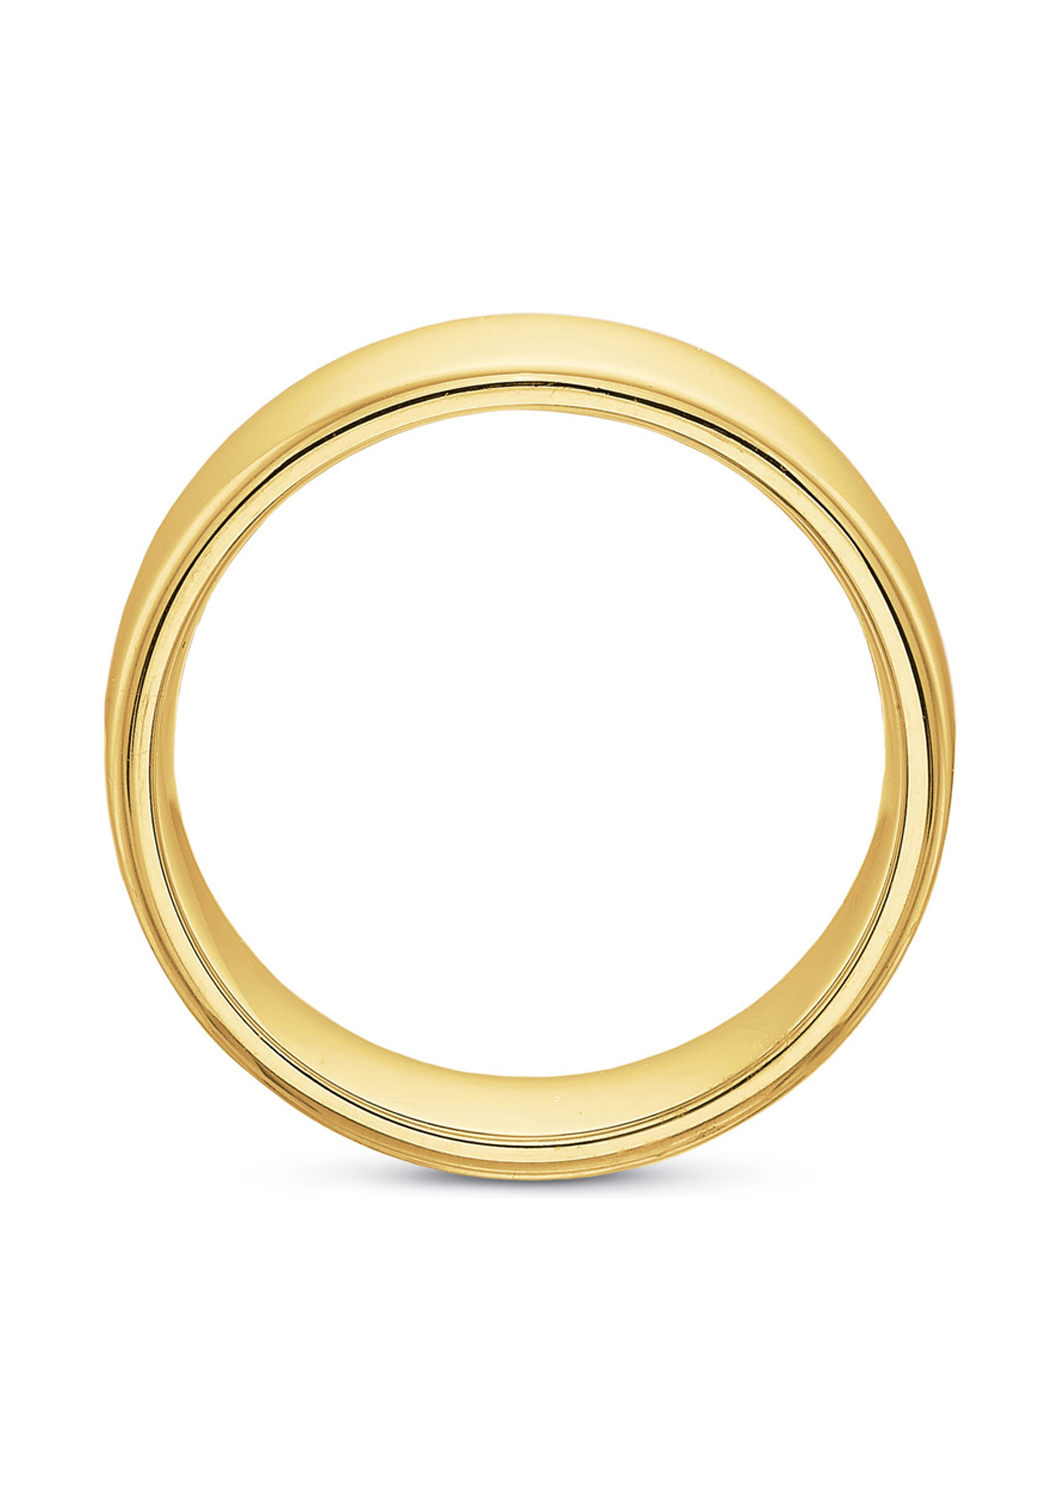 Precision Set 18K Yellow Gold Pipe Cut Comfort Fit Band | OsterJewelers.com